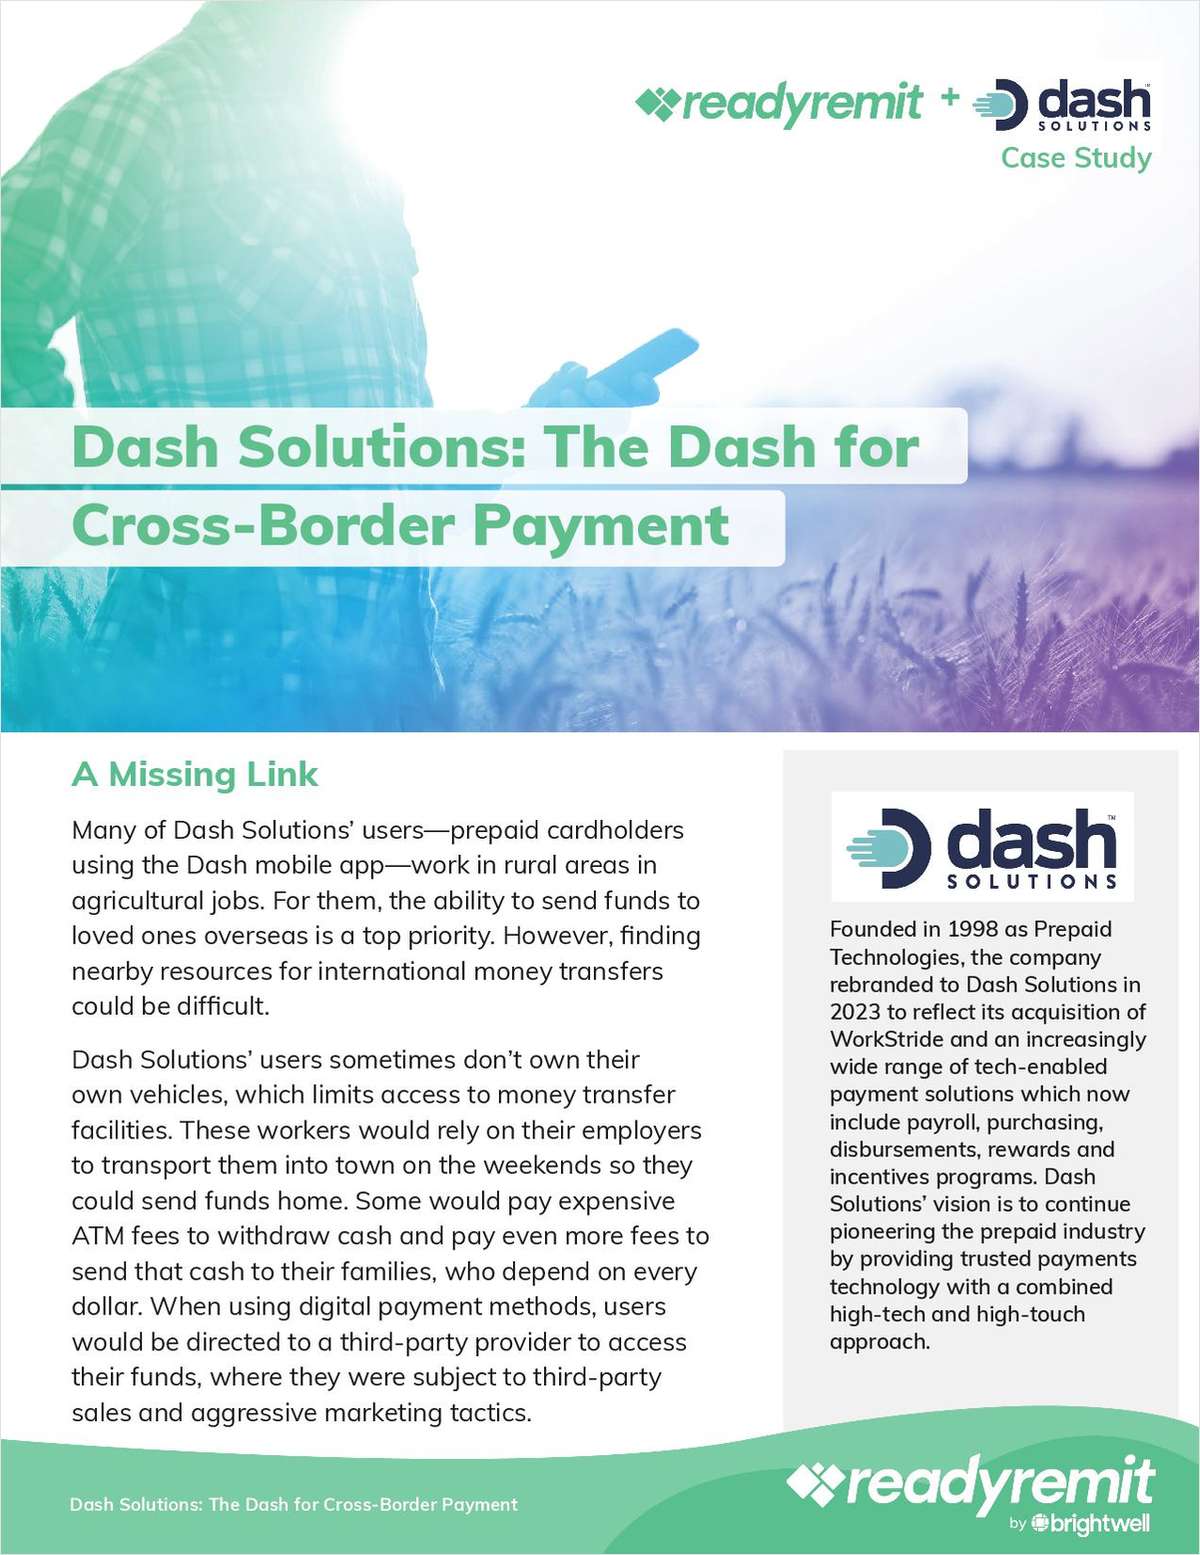 Dash Solutions: The Dash for Cross-Border Payment link